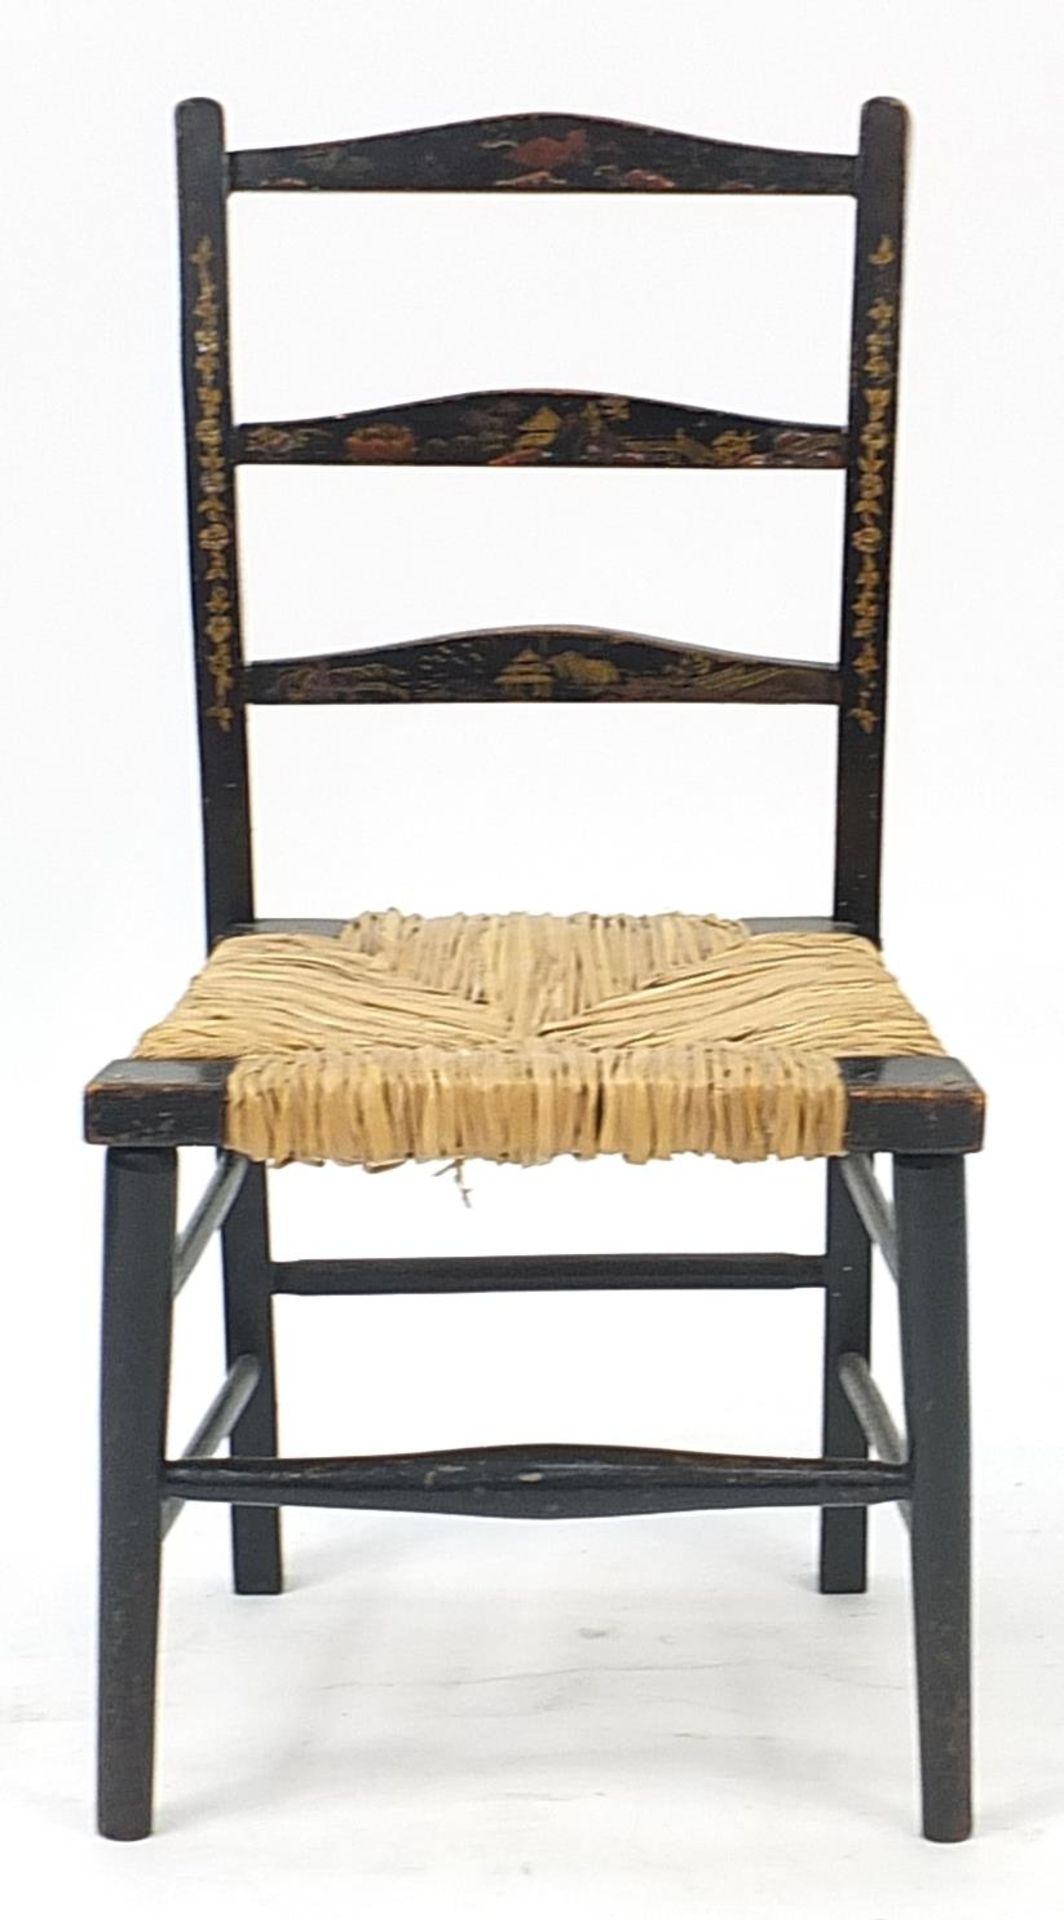 Black lacquered chinoiserie child's chair with wicker seat, 63cm high - Bild 2 aus 4